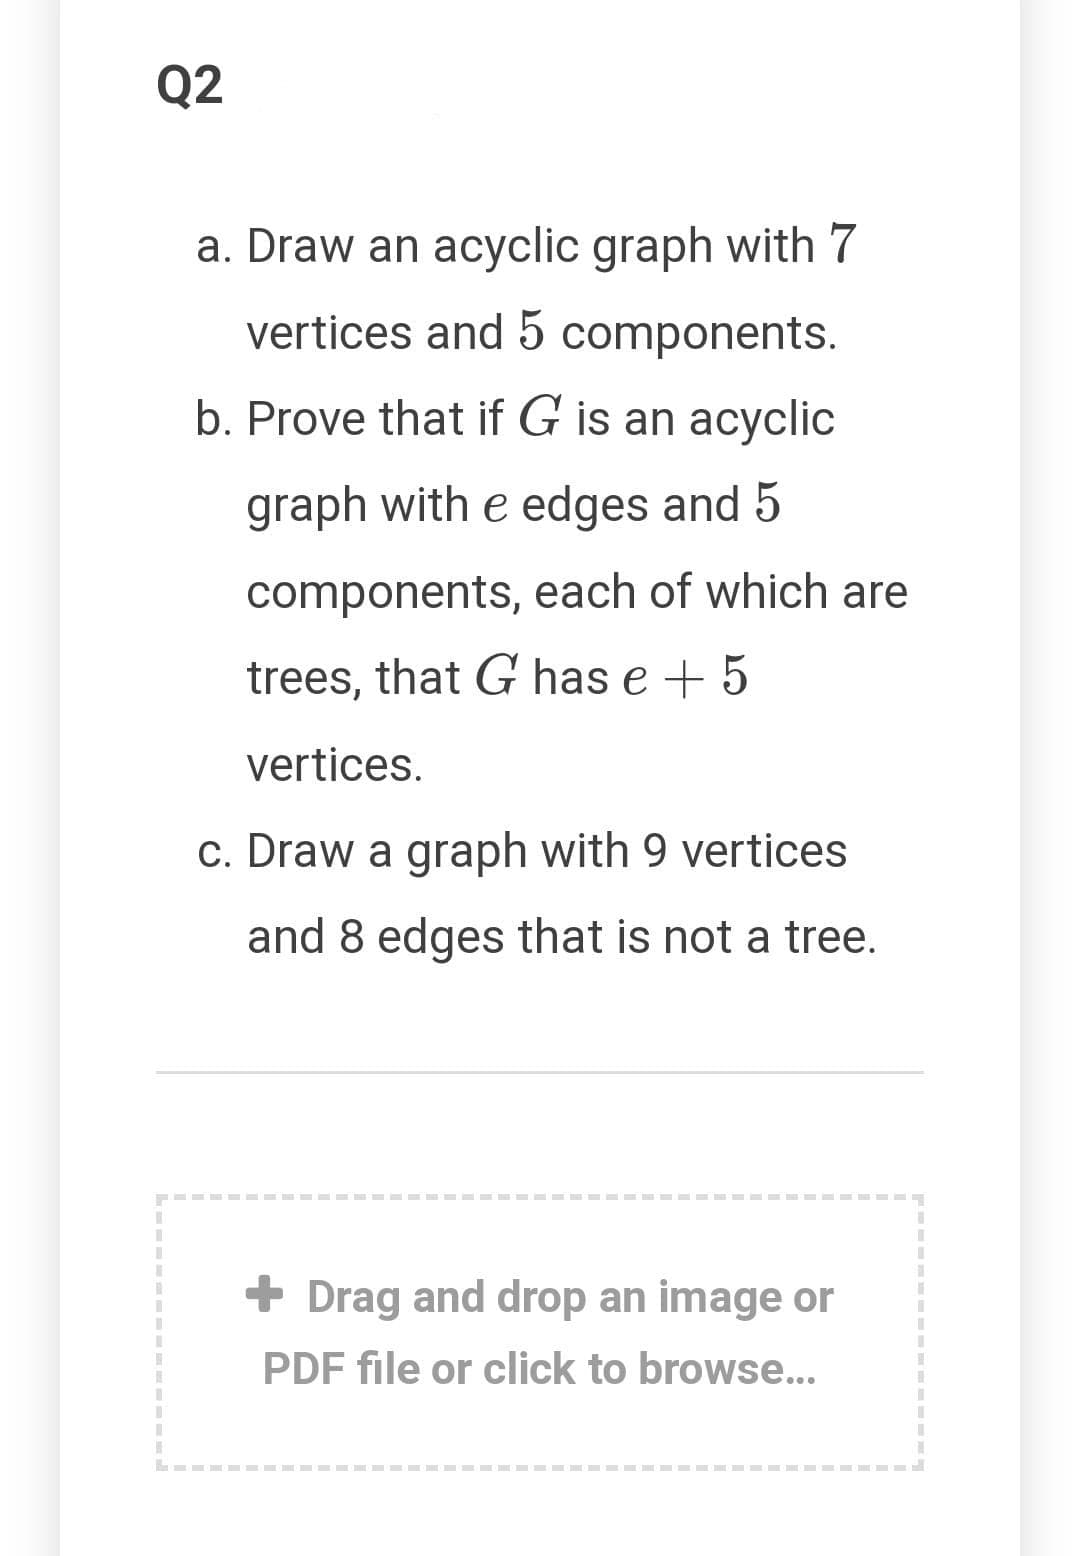 Q2
a. Draw an acyclic graph with 7
vertices and 5 components.
b. Prove that if G is an acyclic
graph with e edges and 5
components, each of which are
trees, that G has e + 5
vertices.
c. Draw a graph with 9 vertices
and 8 edges that is not a tree.
+ Drag and drop an image or
PDF file or click to browse..
